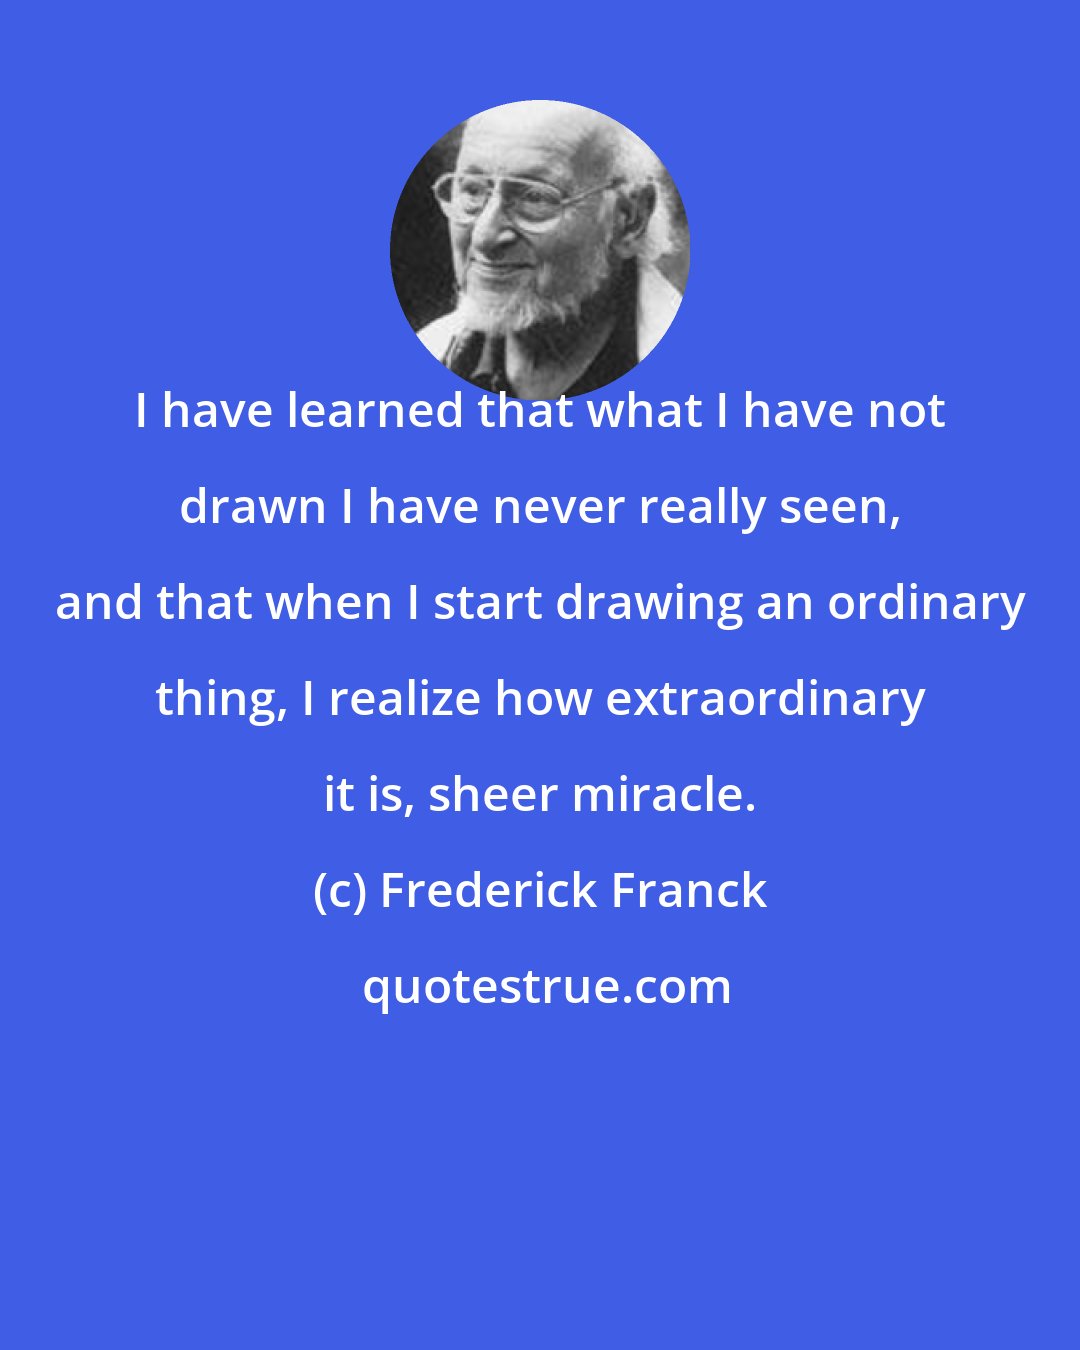 Frederick Franck: I have learned that what I have not drawn I have never really seen, and that when I start drawing an ordinary thing, I realize how extraordinary it is, sheer miracle.